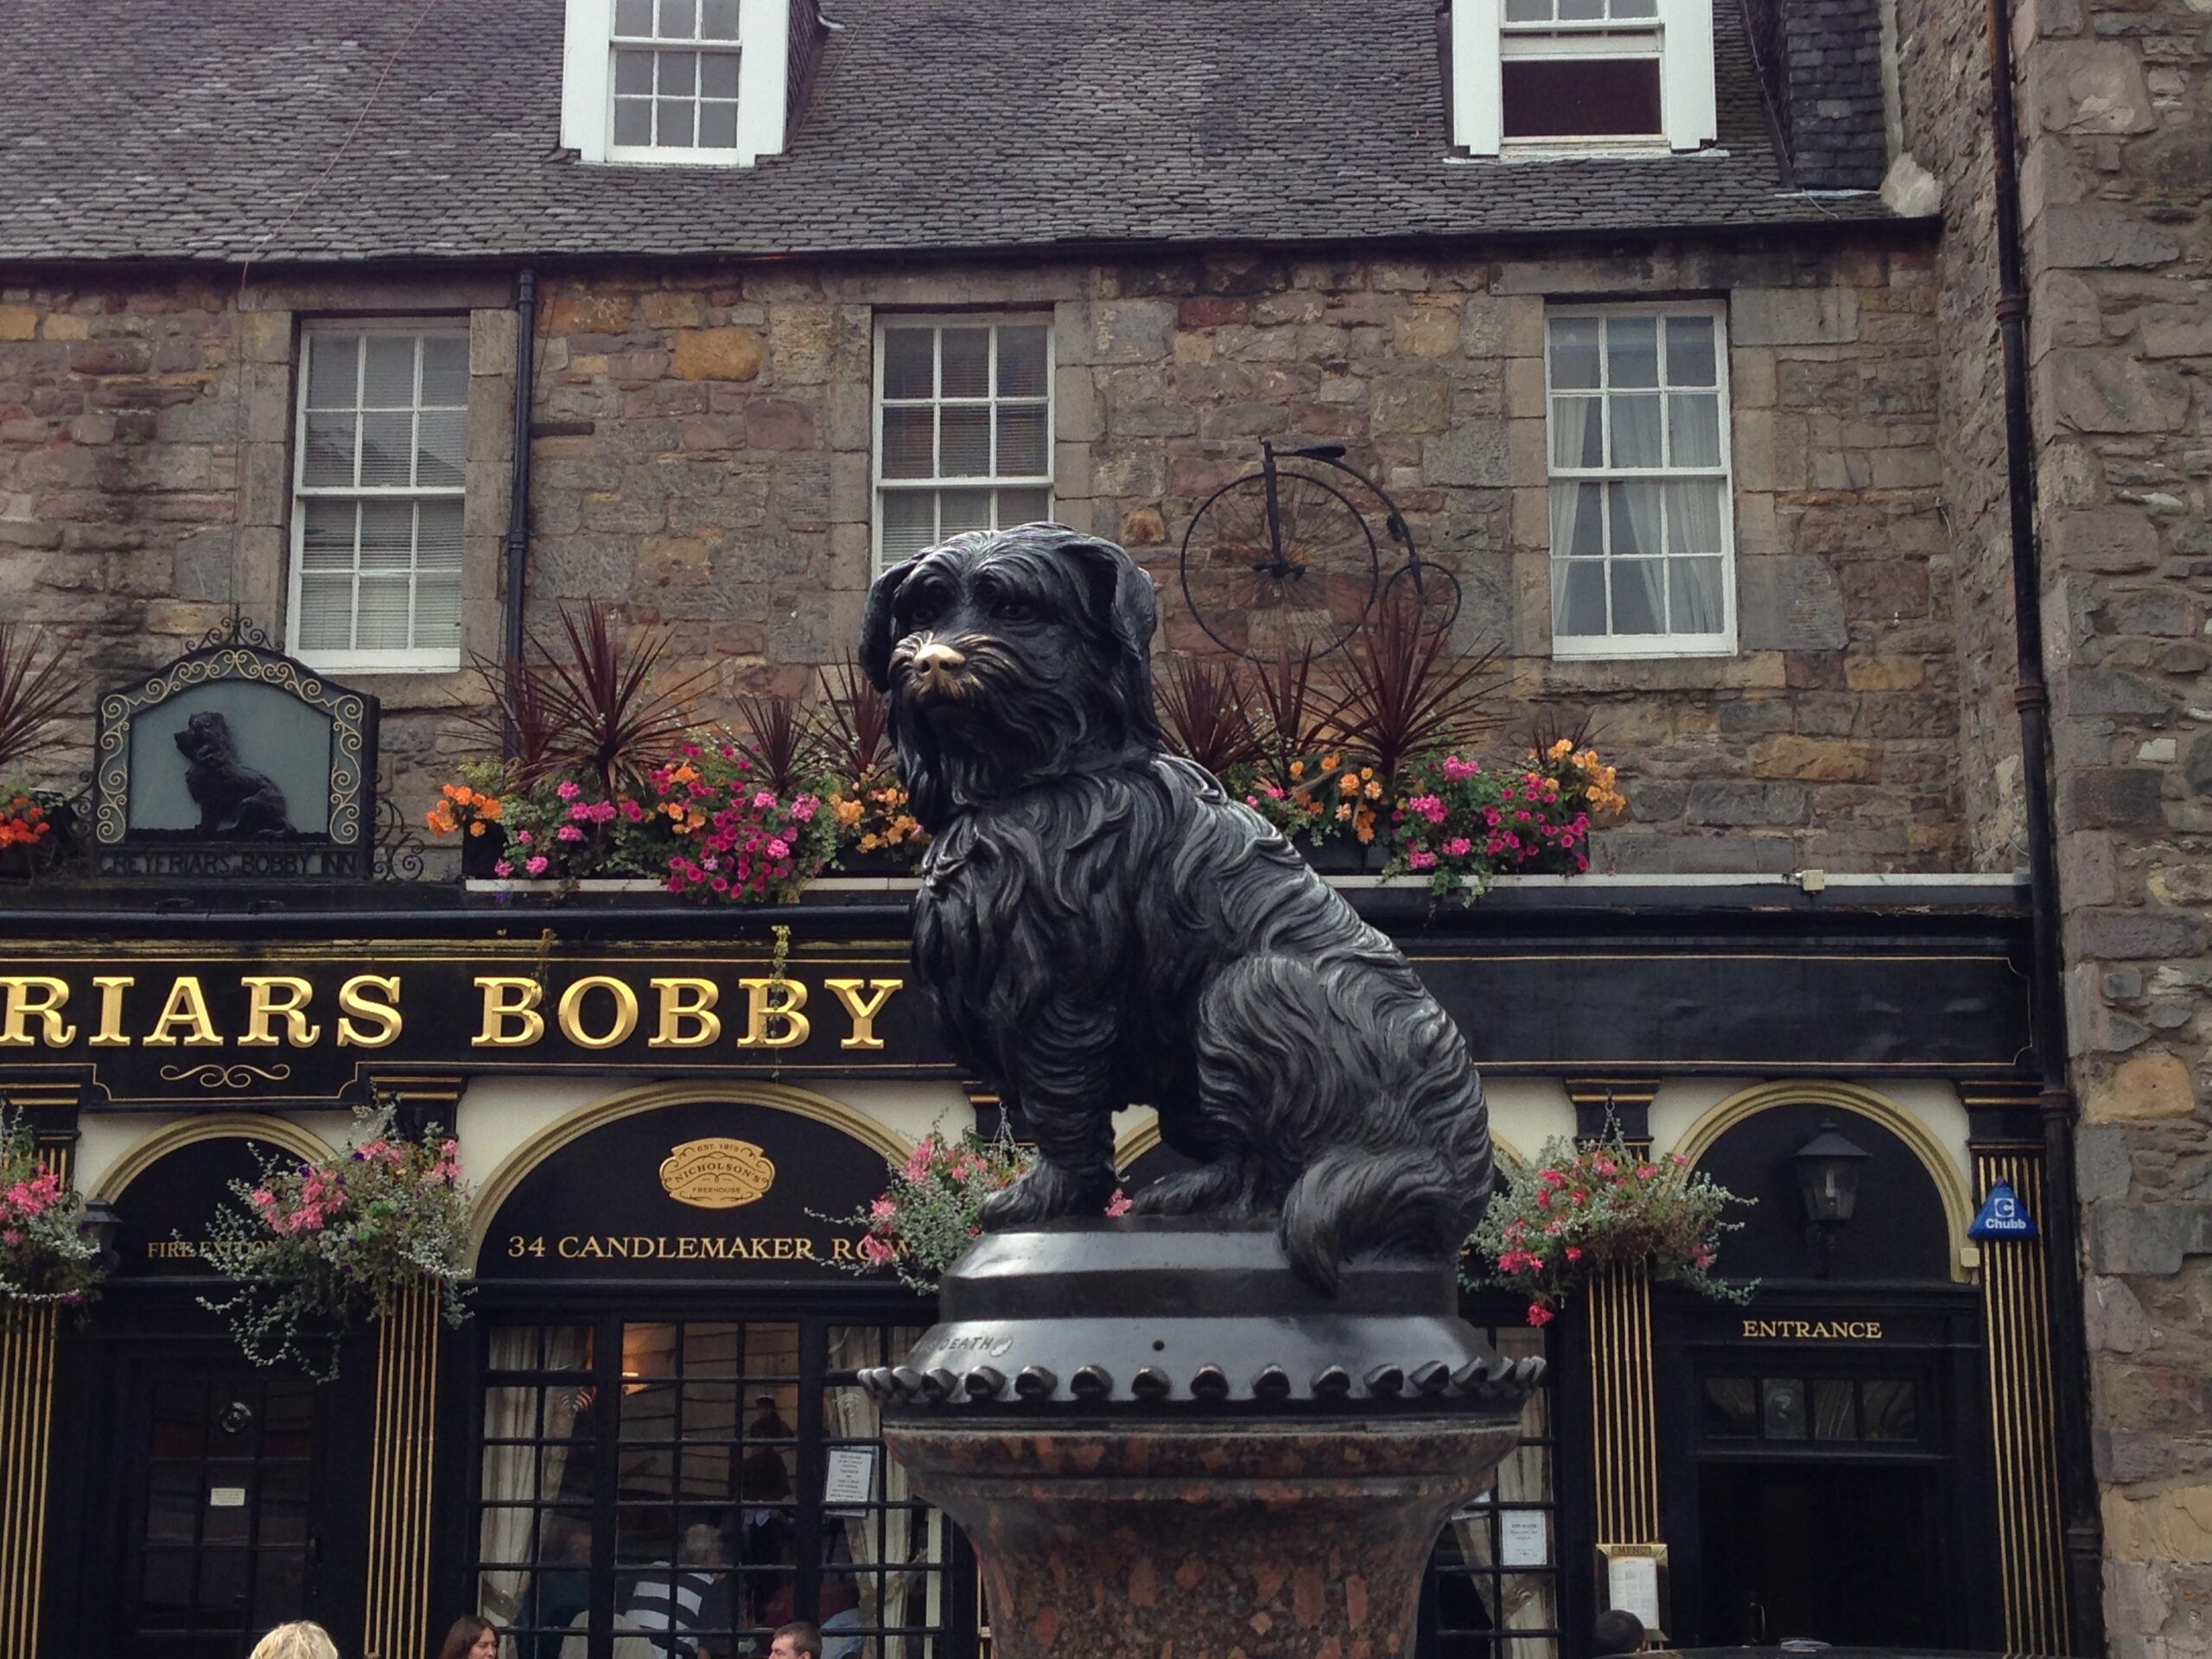 This fountain honors Greyfriars Bobby, the Scottish terrier who is said to have watched over his owner’s grave in Greyfriars Kirkyard for 14 years.